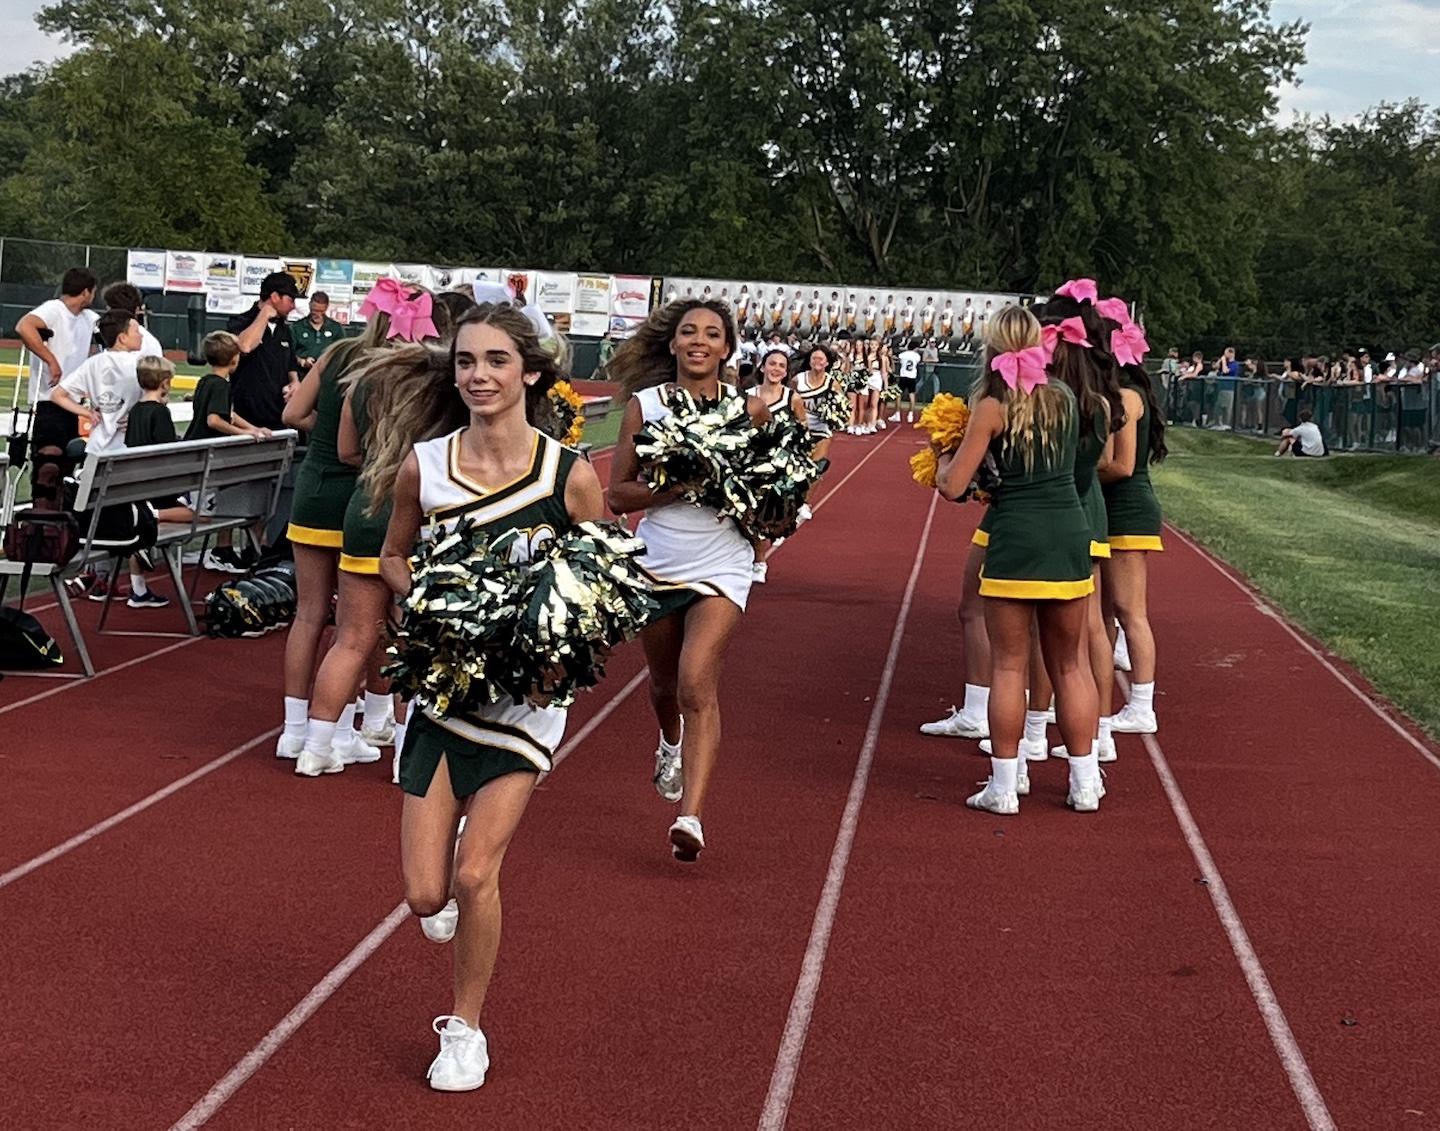 The middle school cheerleaders are introduced